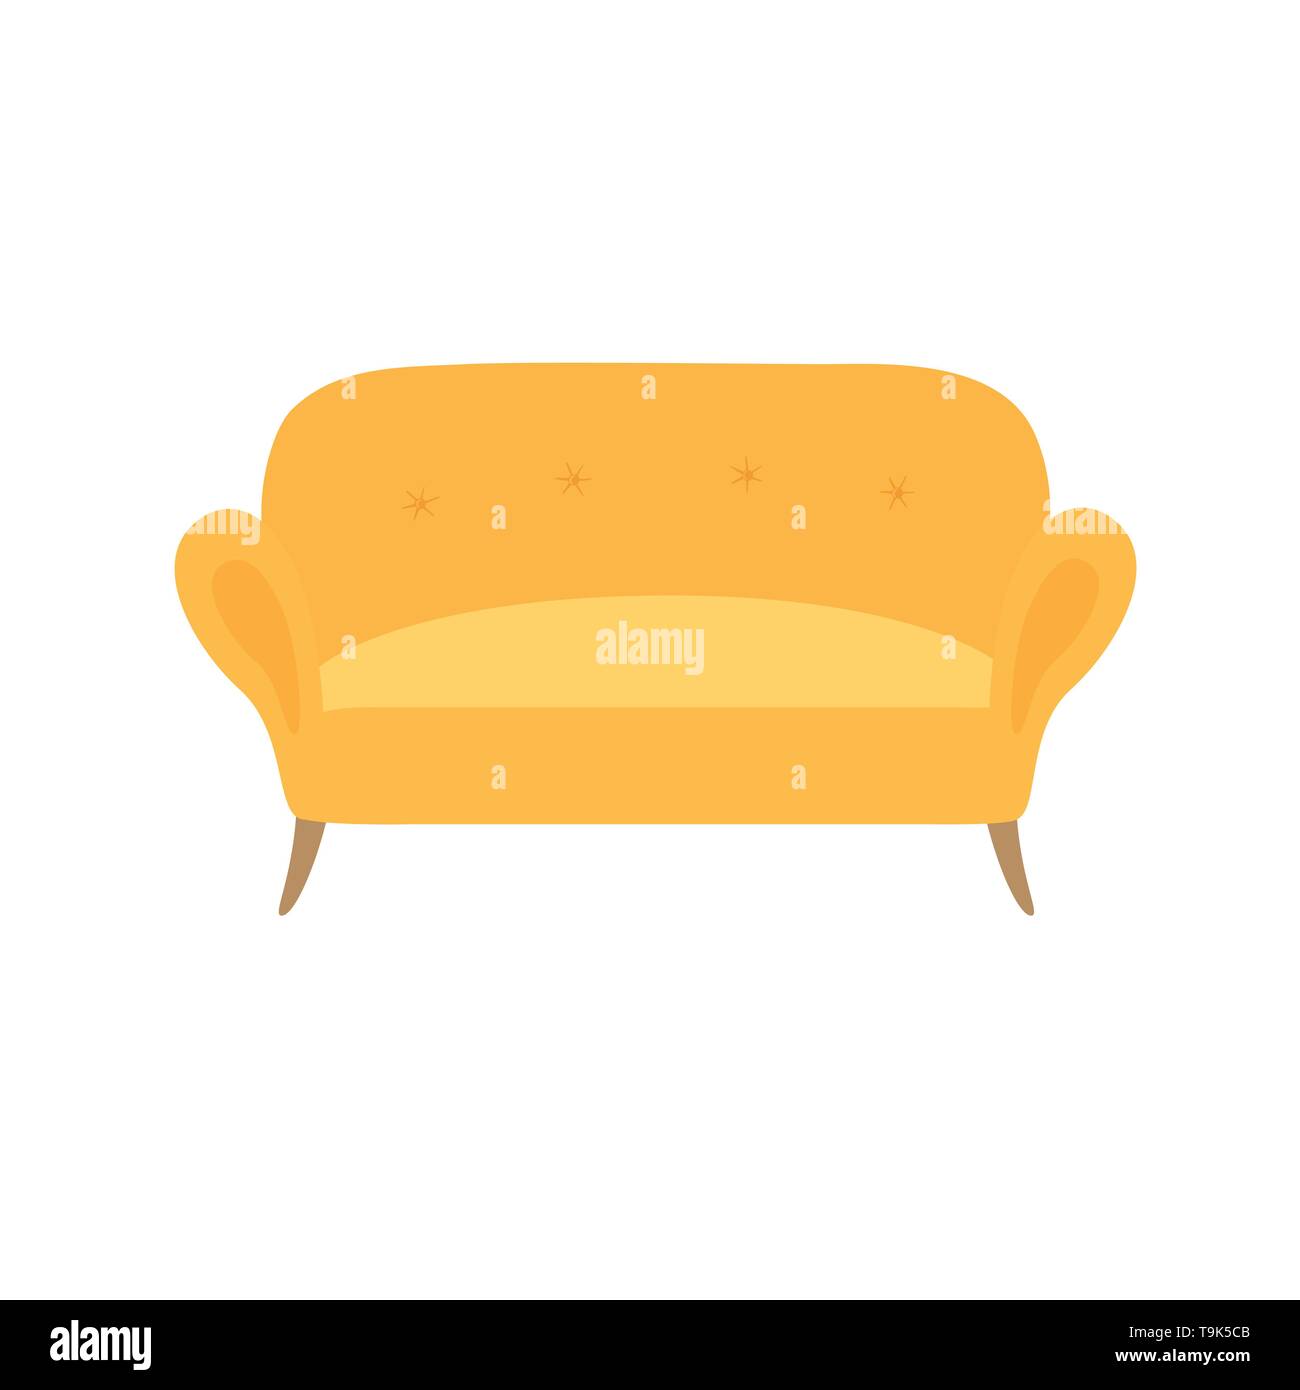 Sofa and couch yellow colorful cartoon illustration vector. Comfortable lounge for interior design isolated on white background. Stock Vector